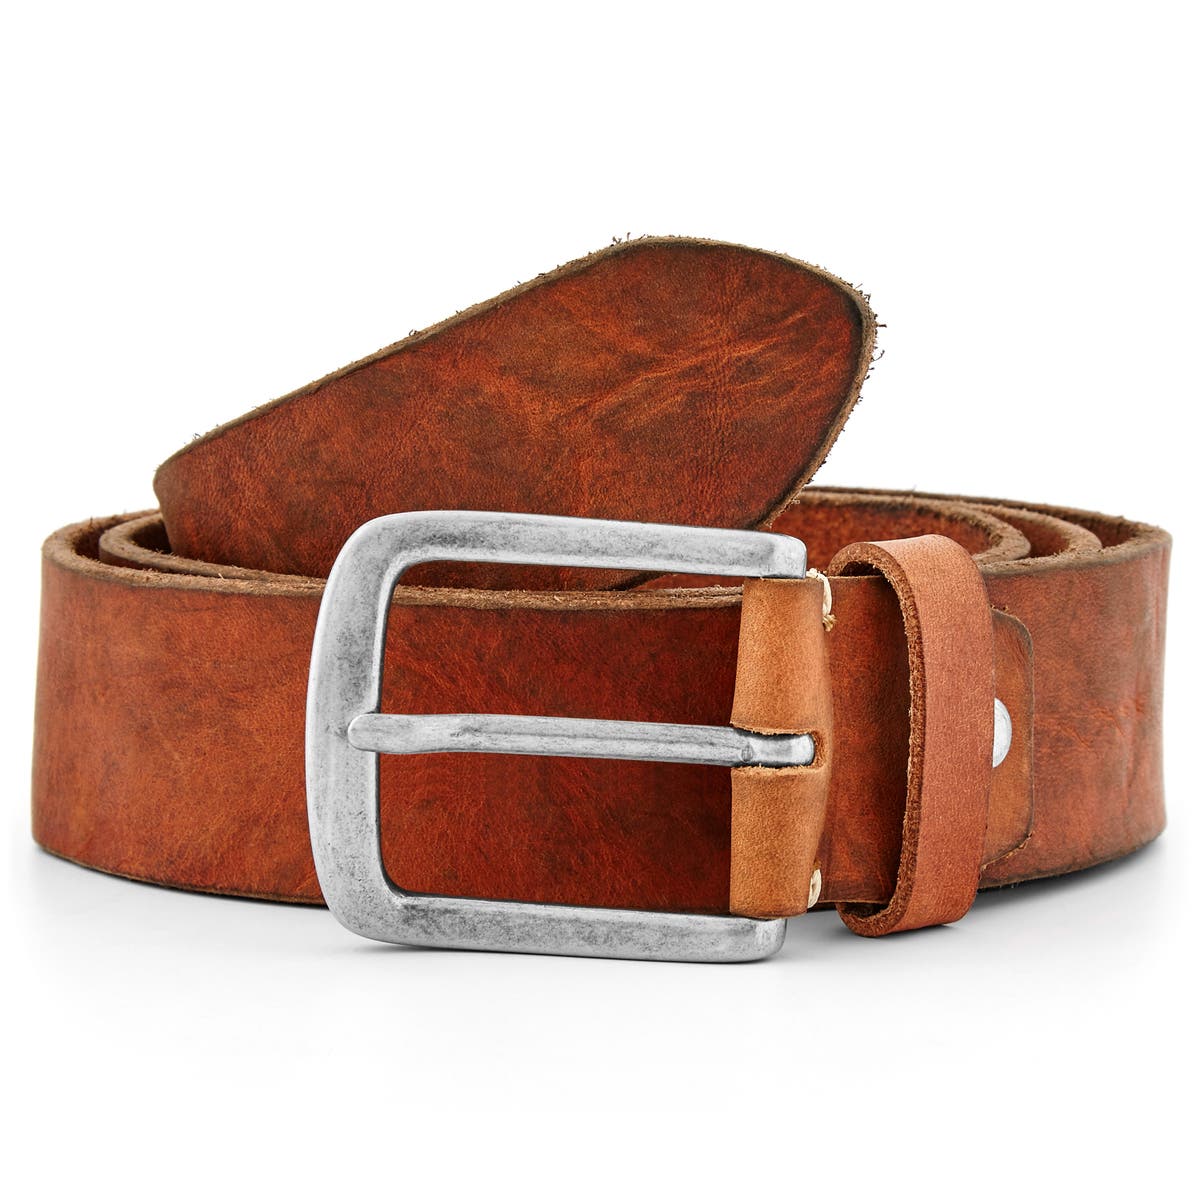 Mottled Tan Leather Belt | BSWK | Free shipping